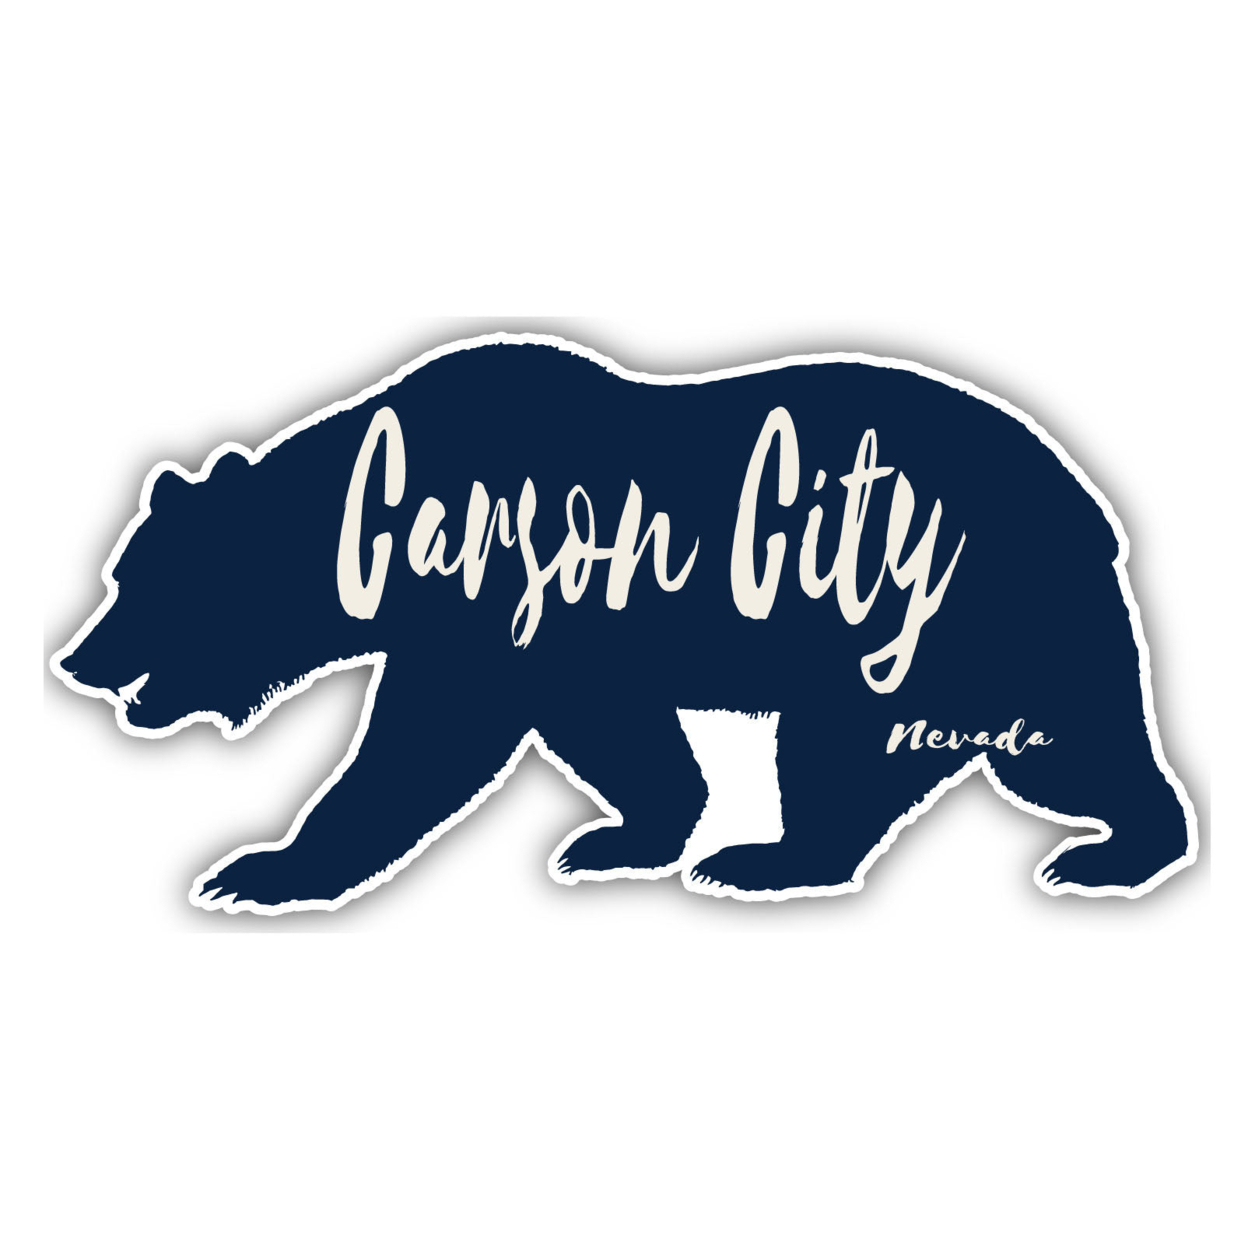 Carson City Nevada Souvenir Decorative Stickers (Choose Theme And Size) - 4-Pack, 8-Inch, Bear